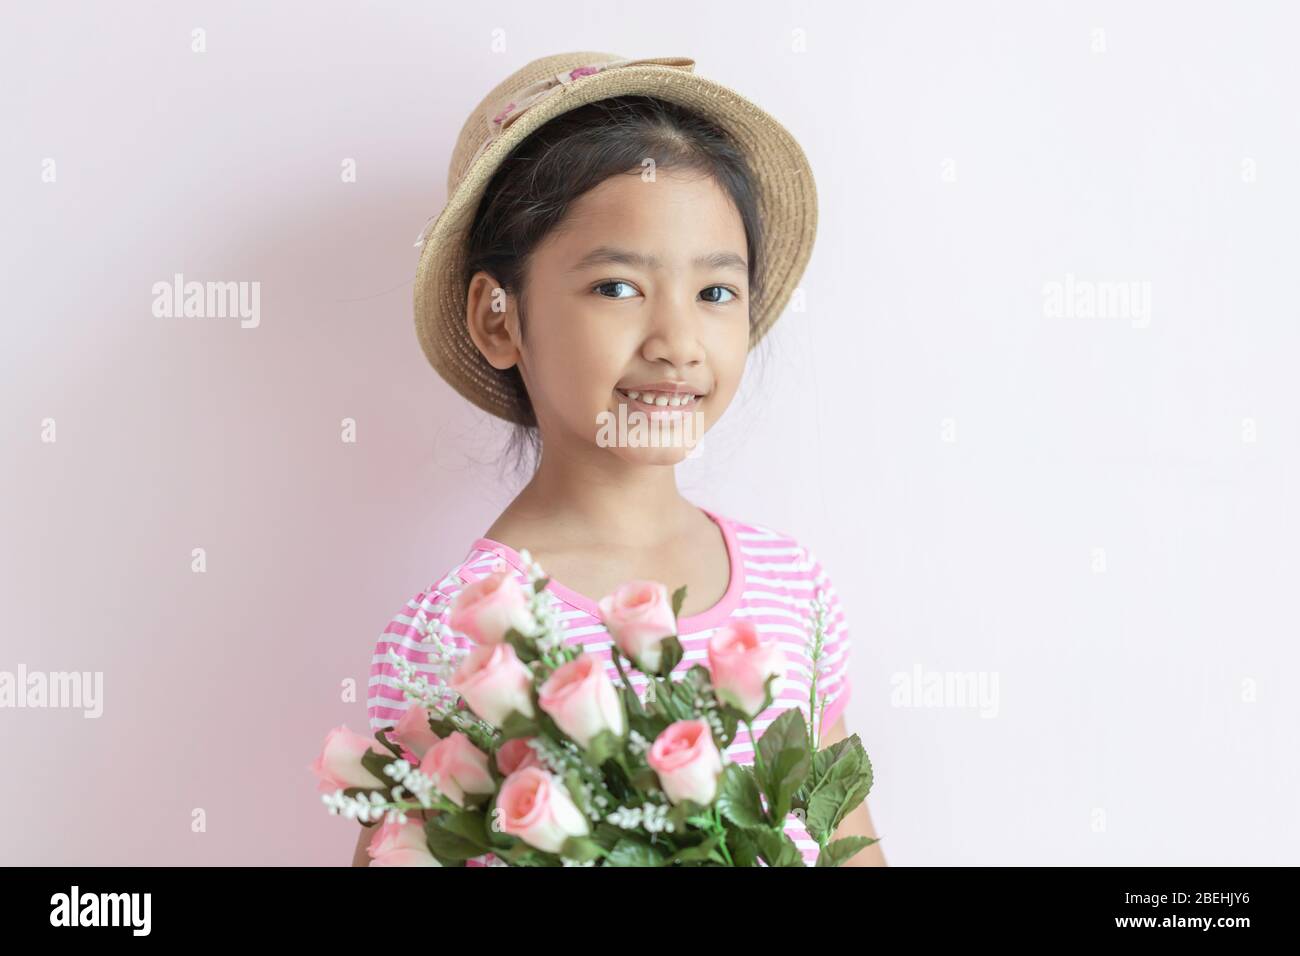 Portrait of an Asian little girl wearing a pink and white striped dress. The child wears a hat and holding roses flowers with smiling and happy. Stock Photo